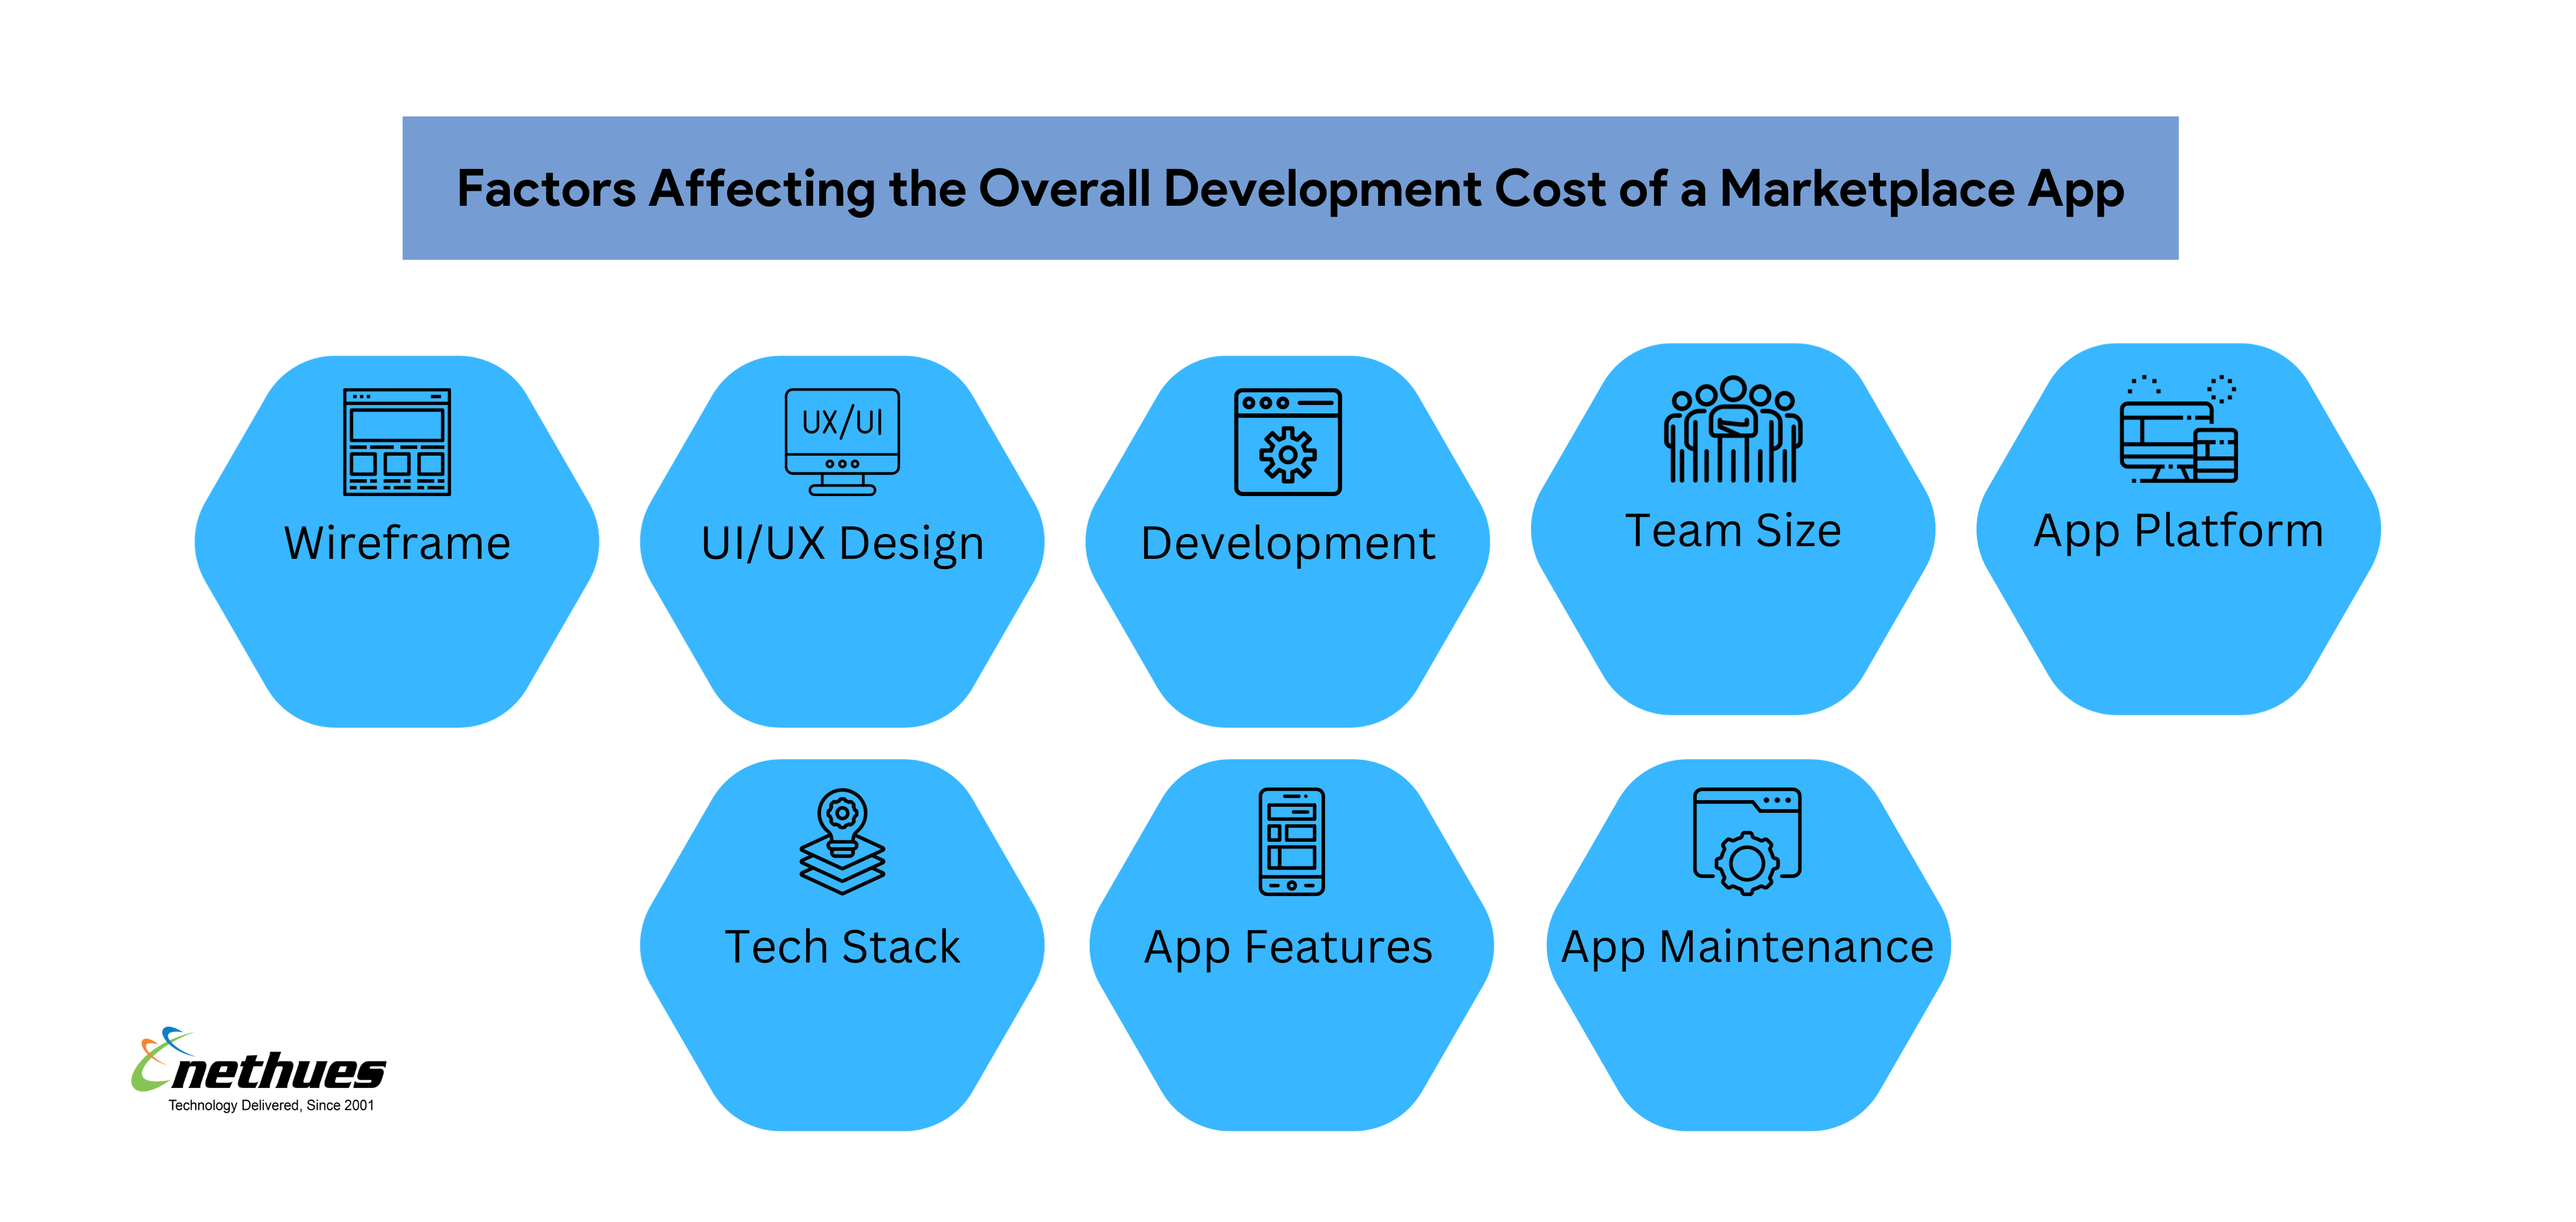 Factors Affecting the Overall Development Cost of a Marketplace App